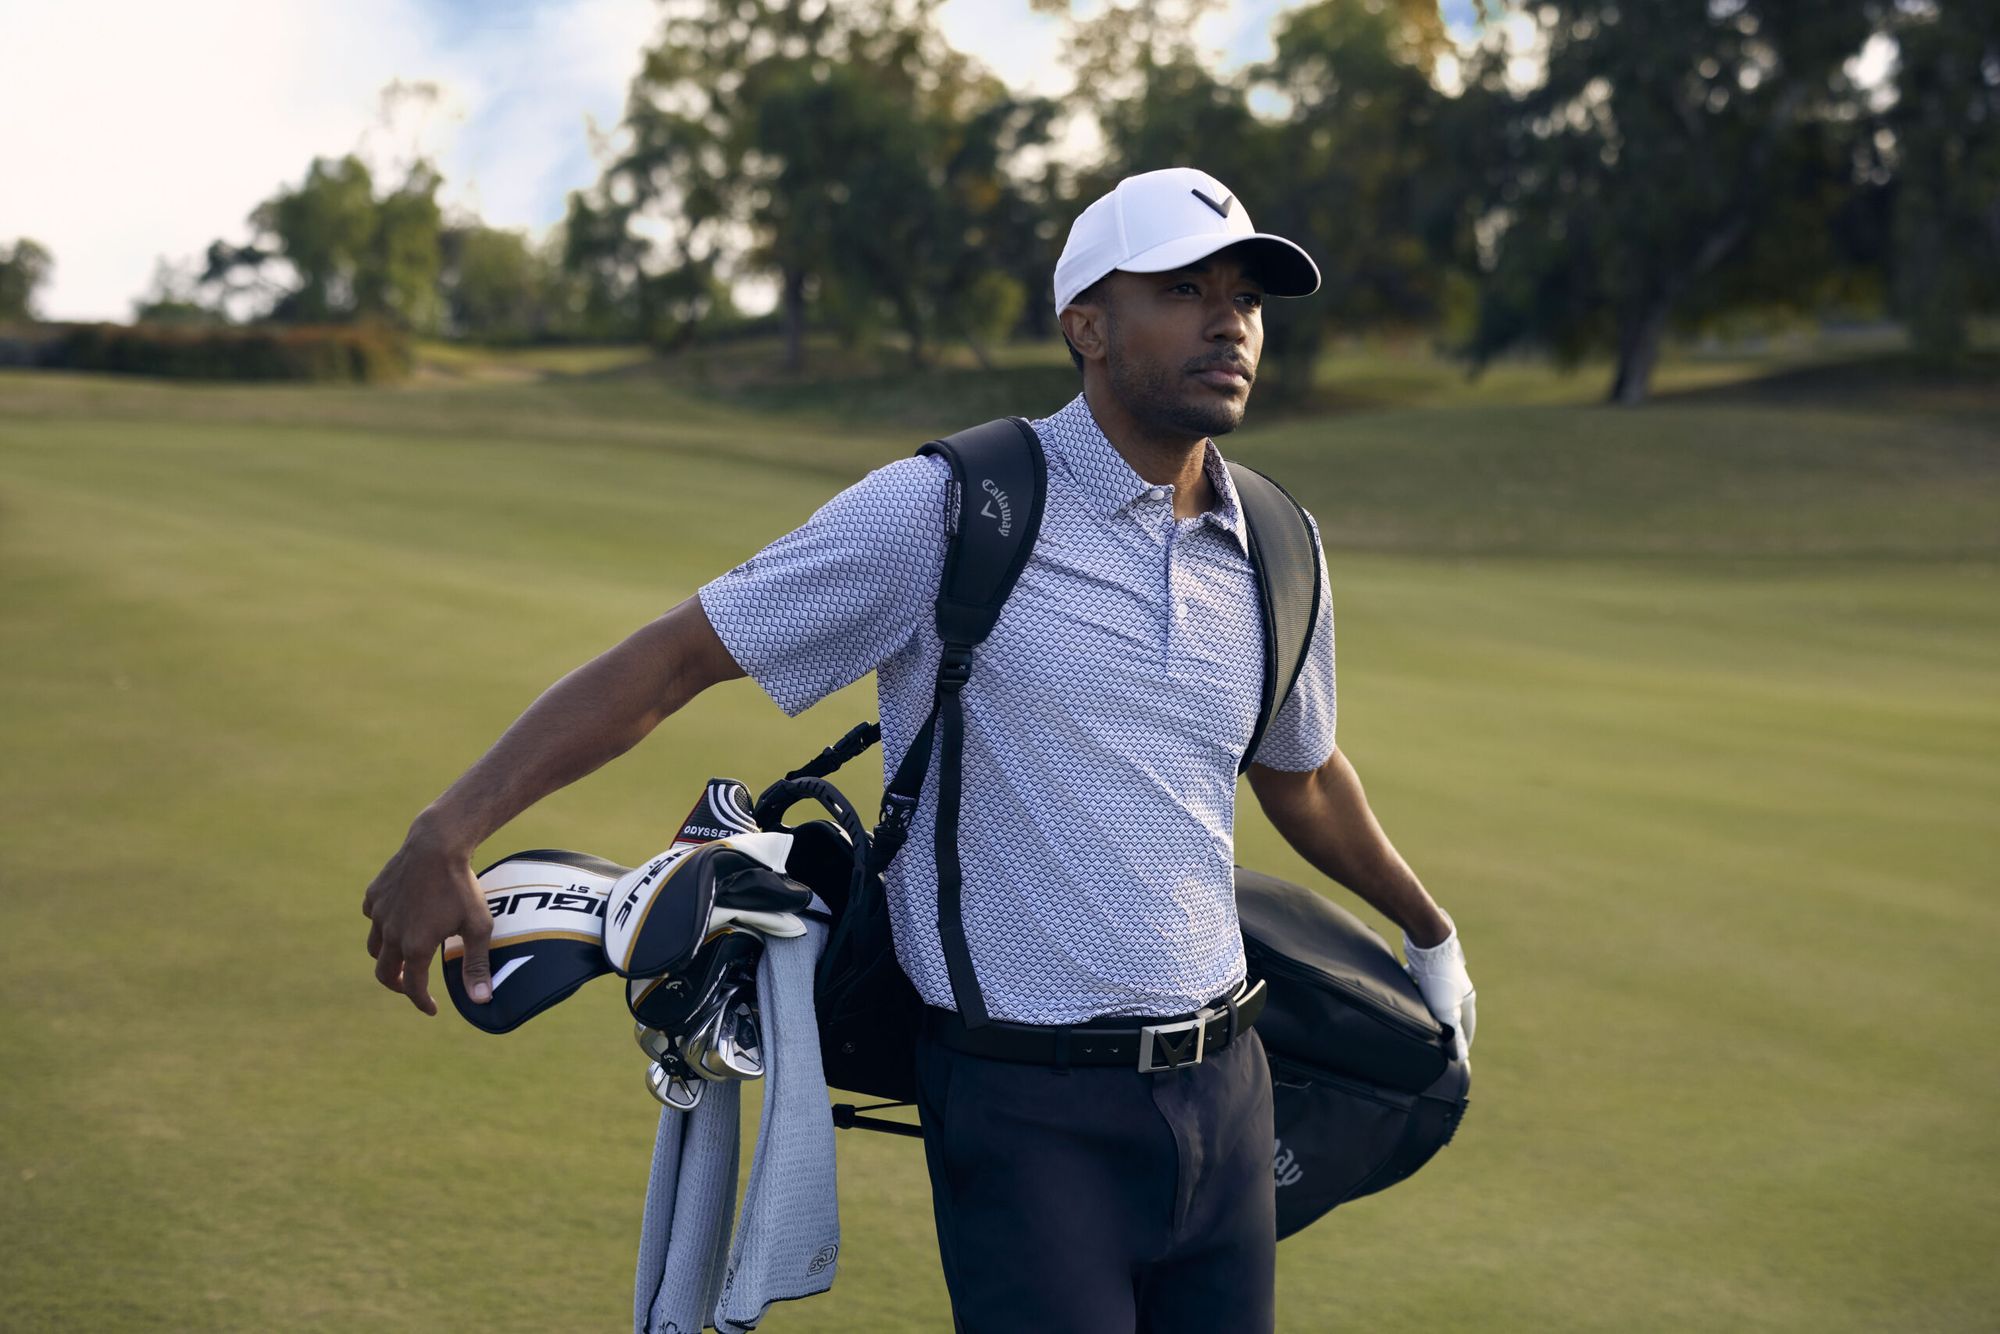 Male golfer on a fairway wearing a cap, polo, golf trousers and a golf bag